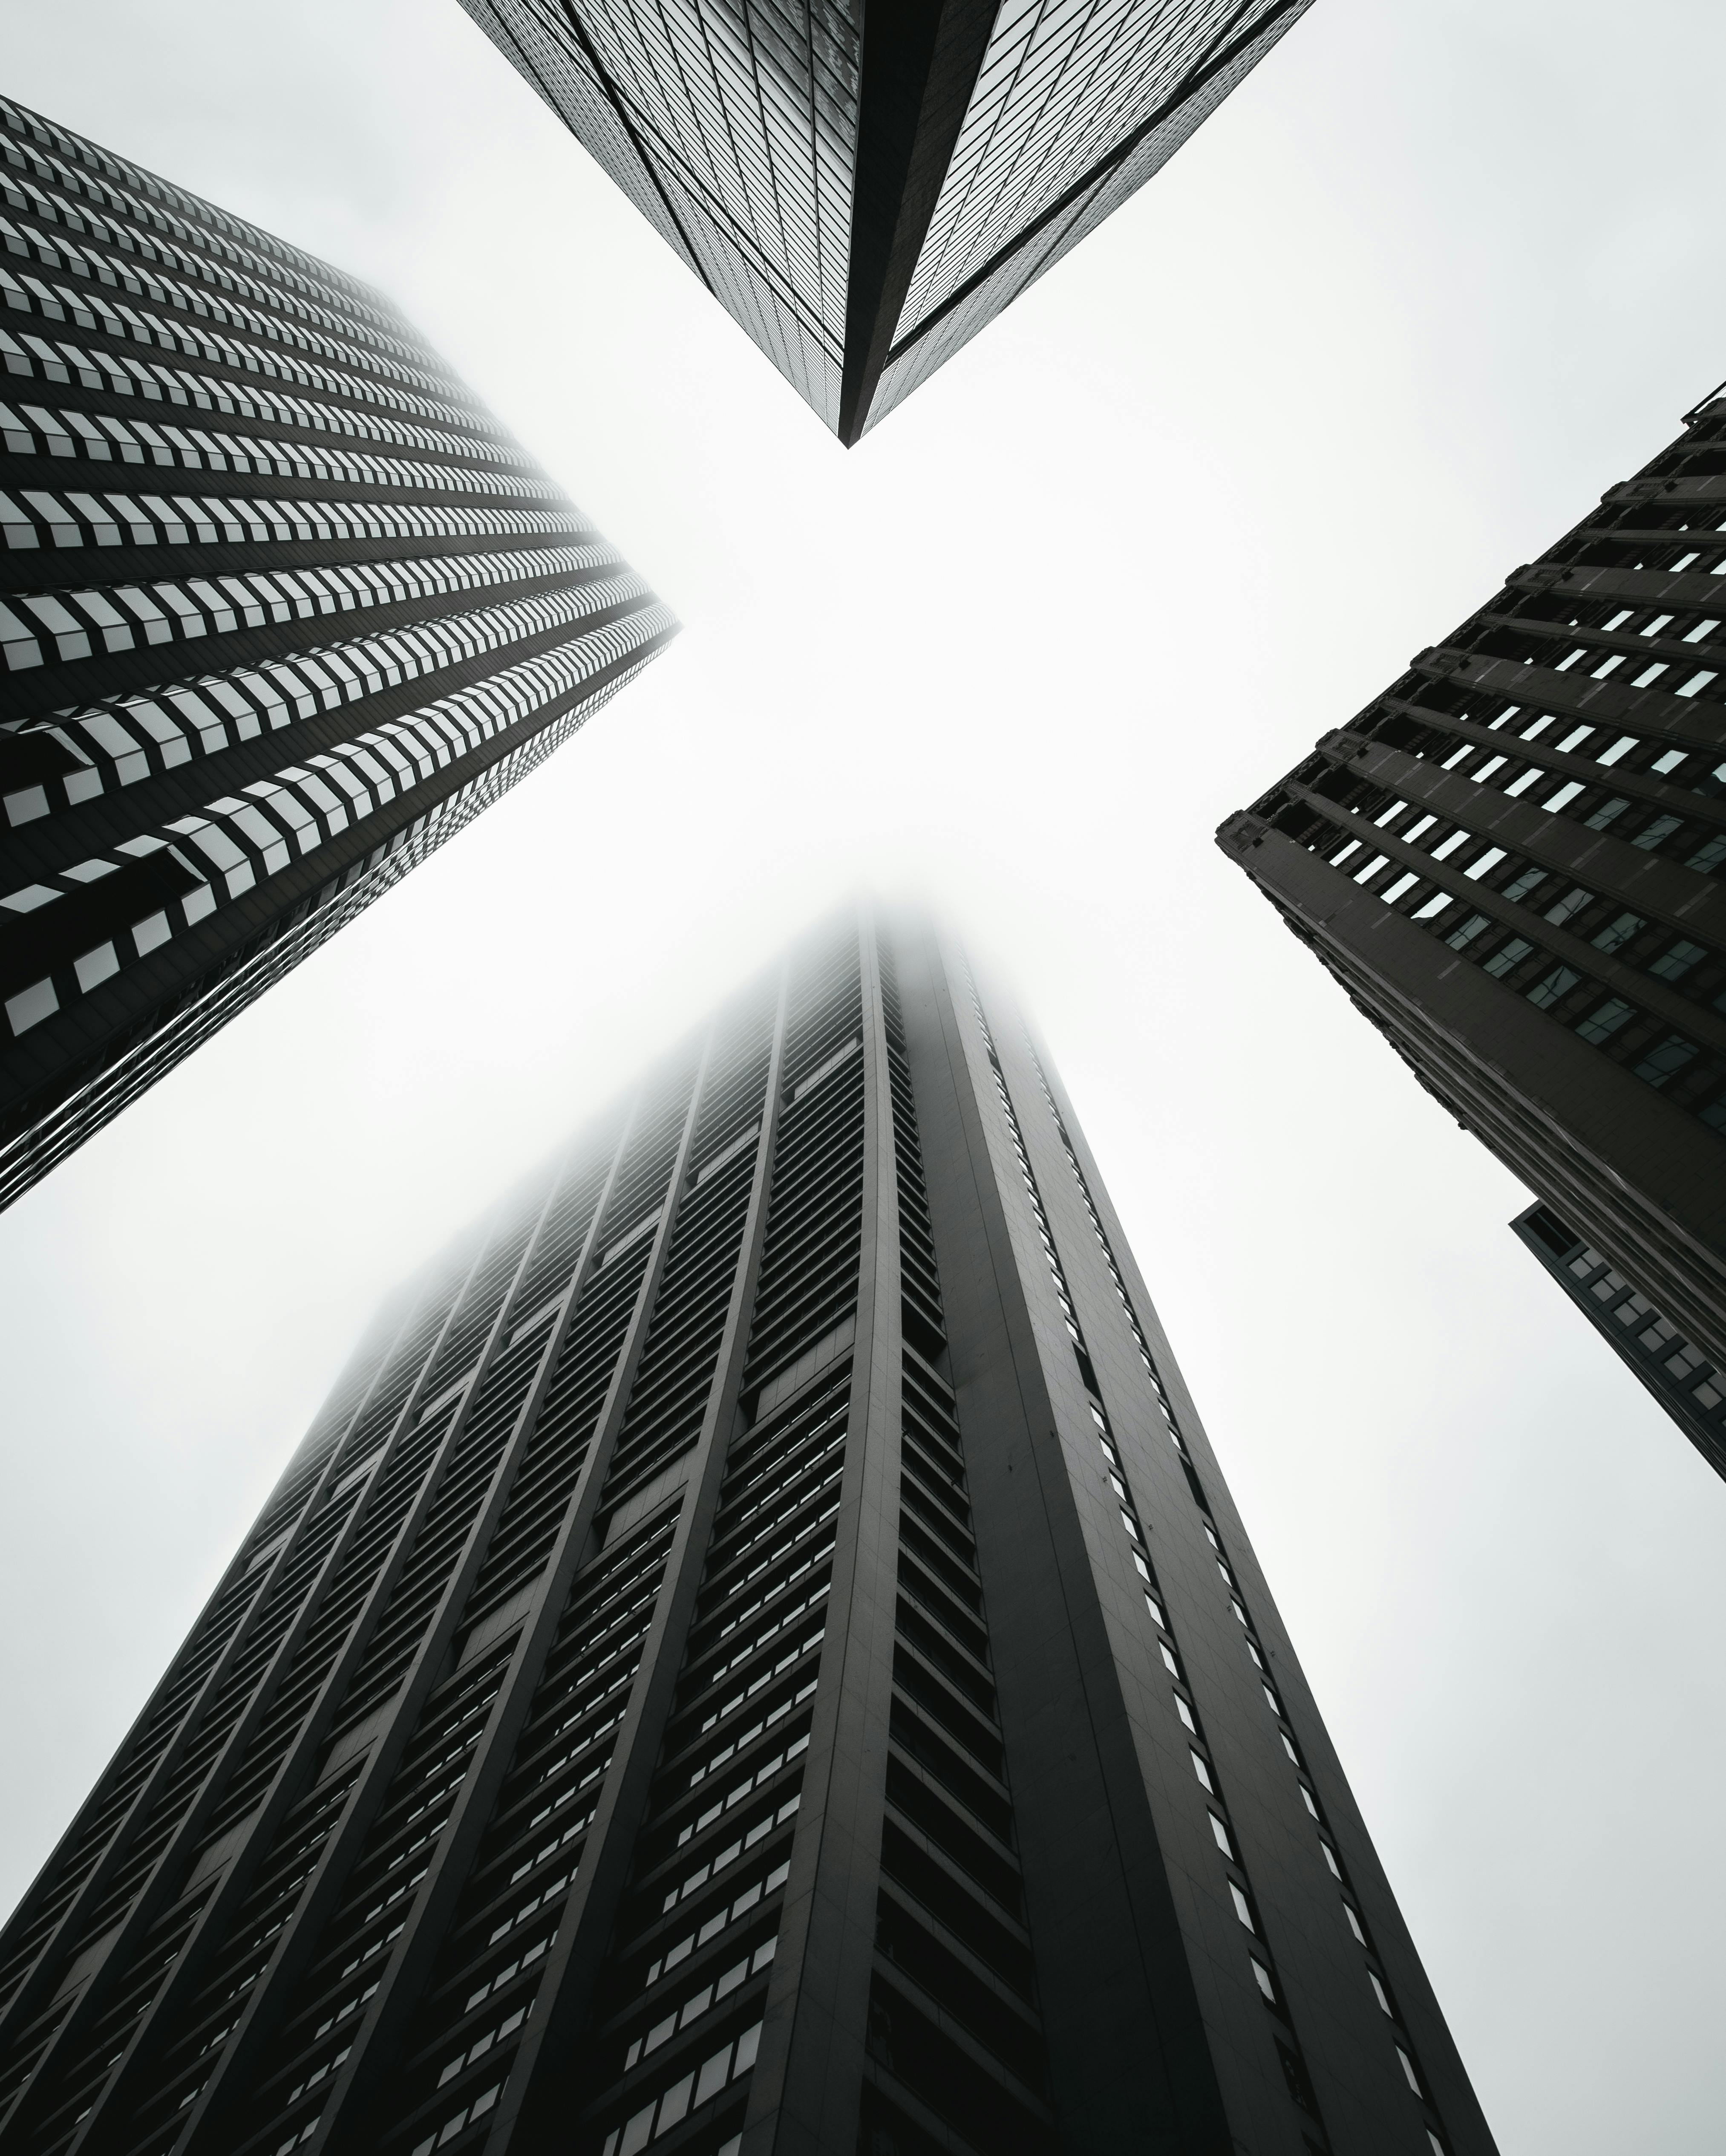 monochrome photo of high rise buildings